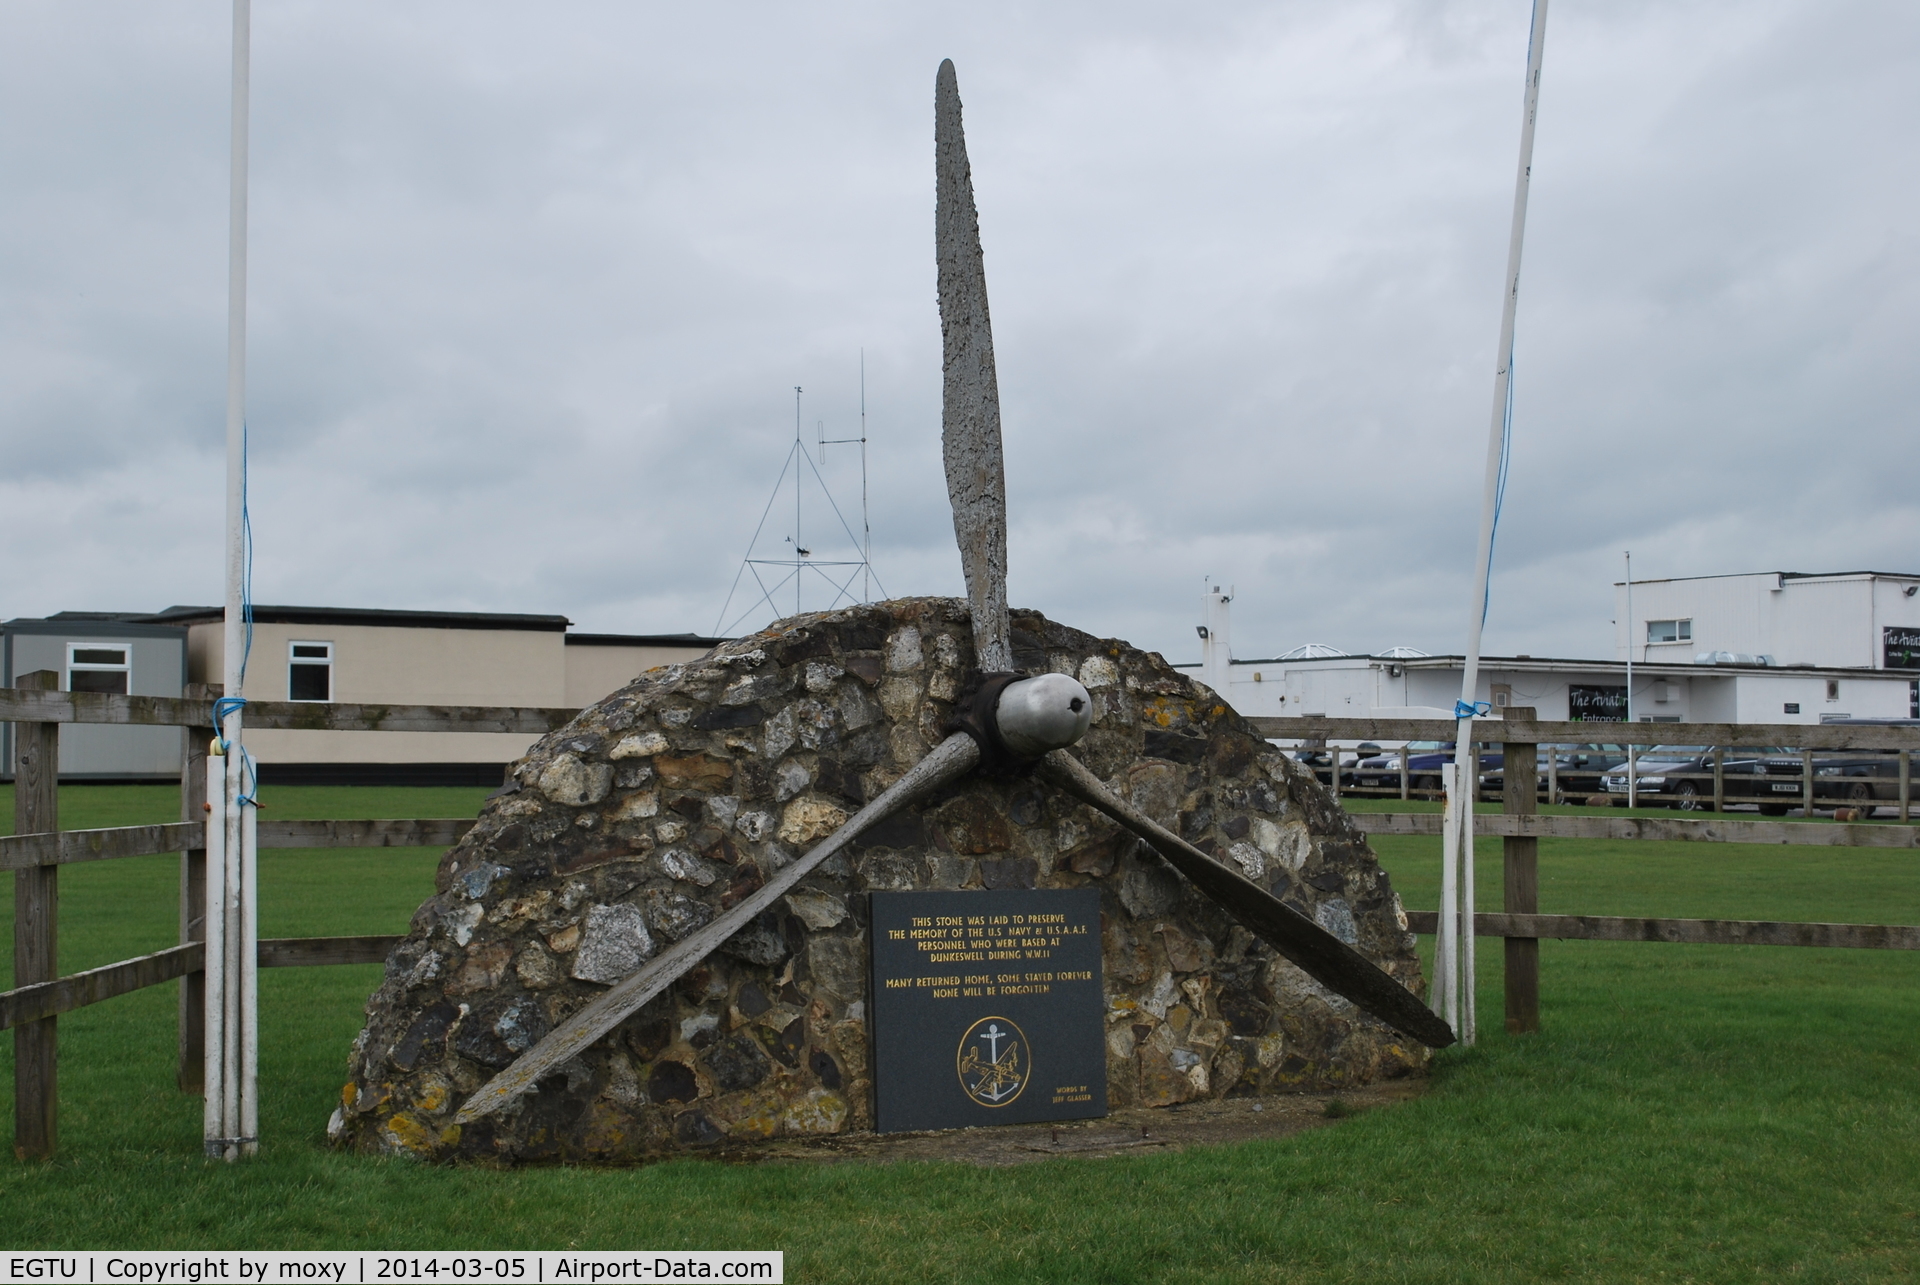 Dunkeswell Aerodrome Airport, Honiton, England United Kingdom (EGTU) - Memorial in memory of the USN and USAAF personnel who were based at Dunkeswell during World War II. 